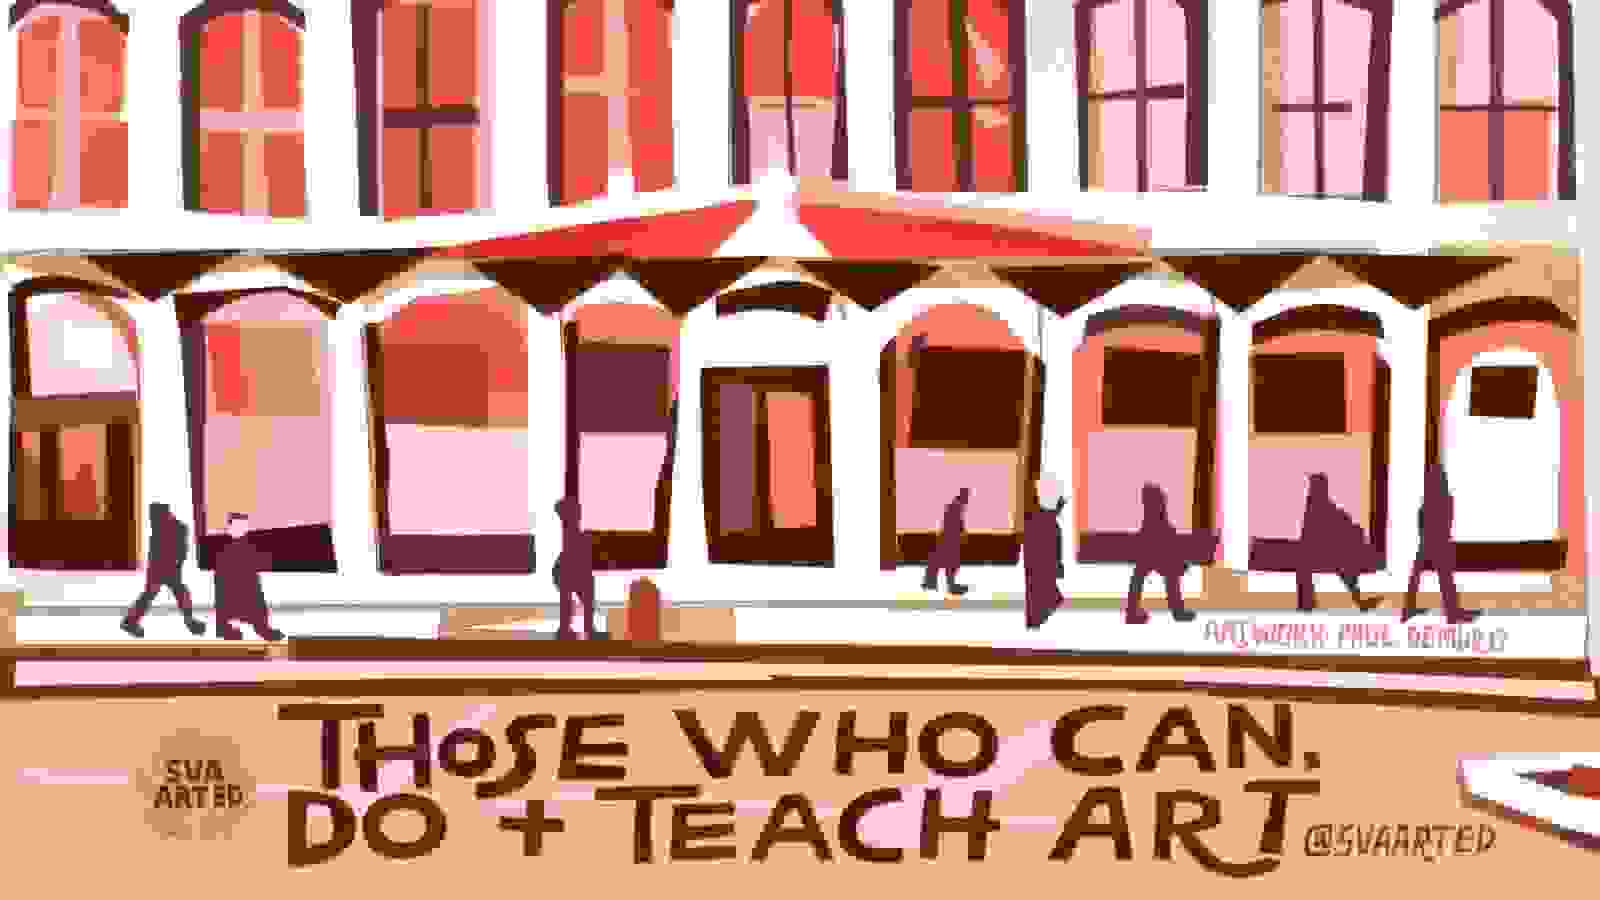 Poster of a collage showing building entrance with silhouettes of people walking by - reads Those who can, do + teach art 